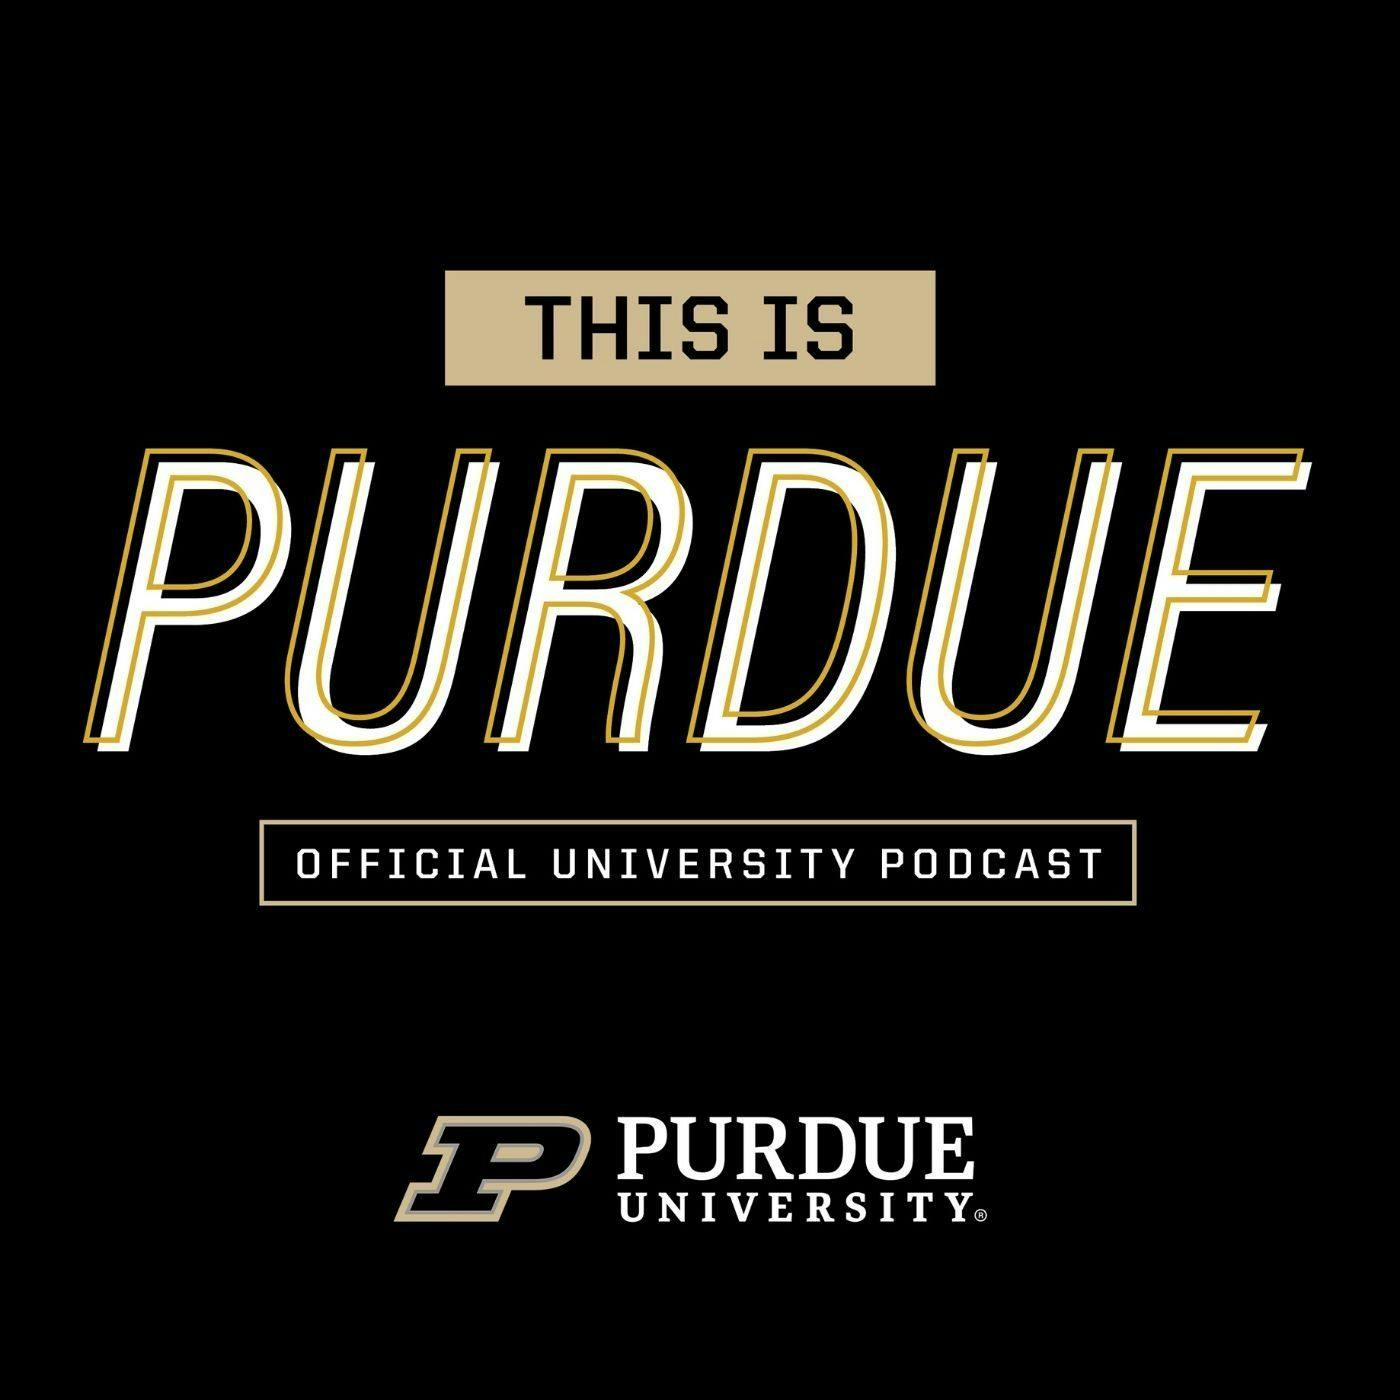 Review: This Is Purdue from Purdue University